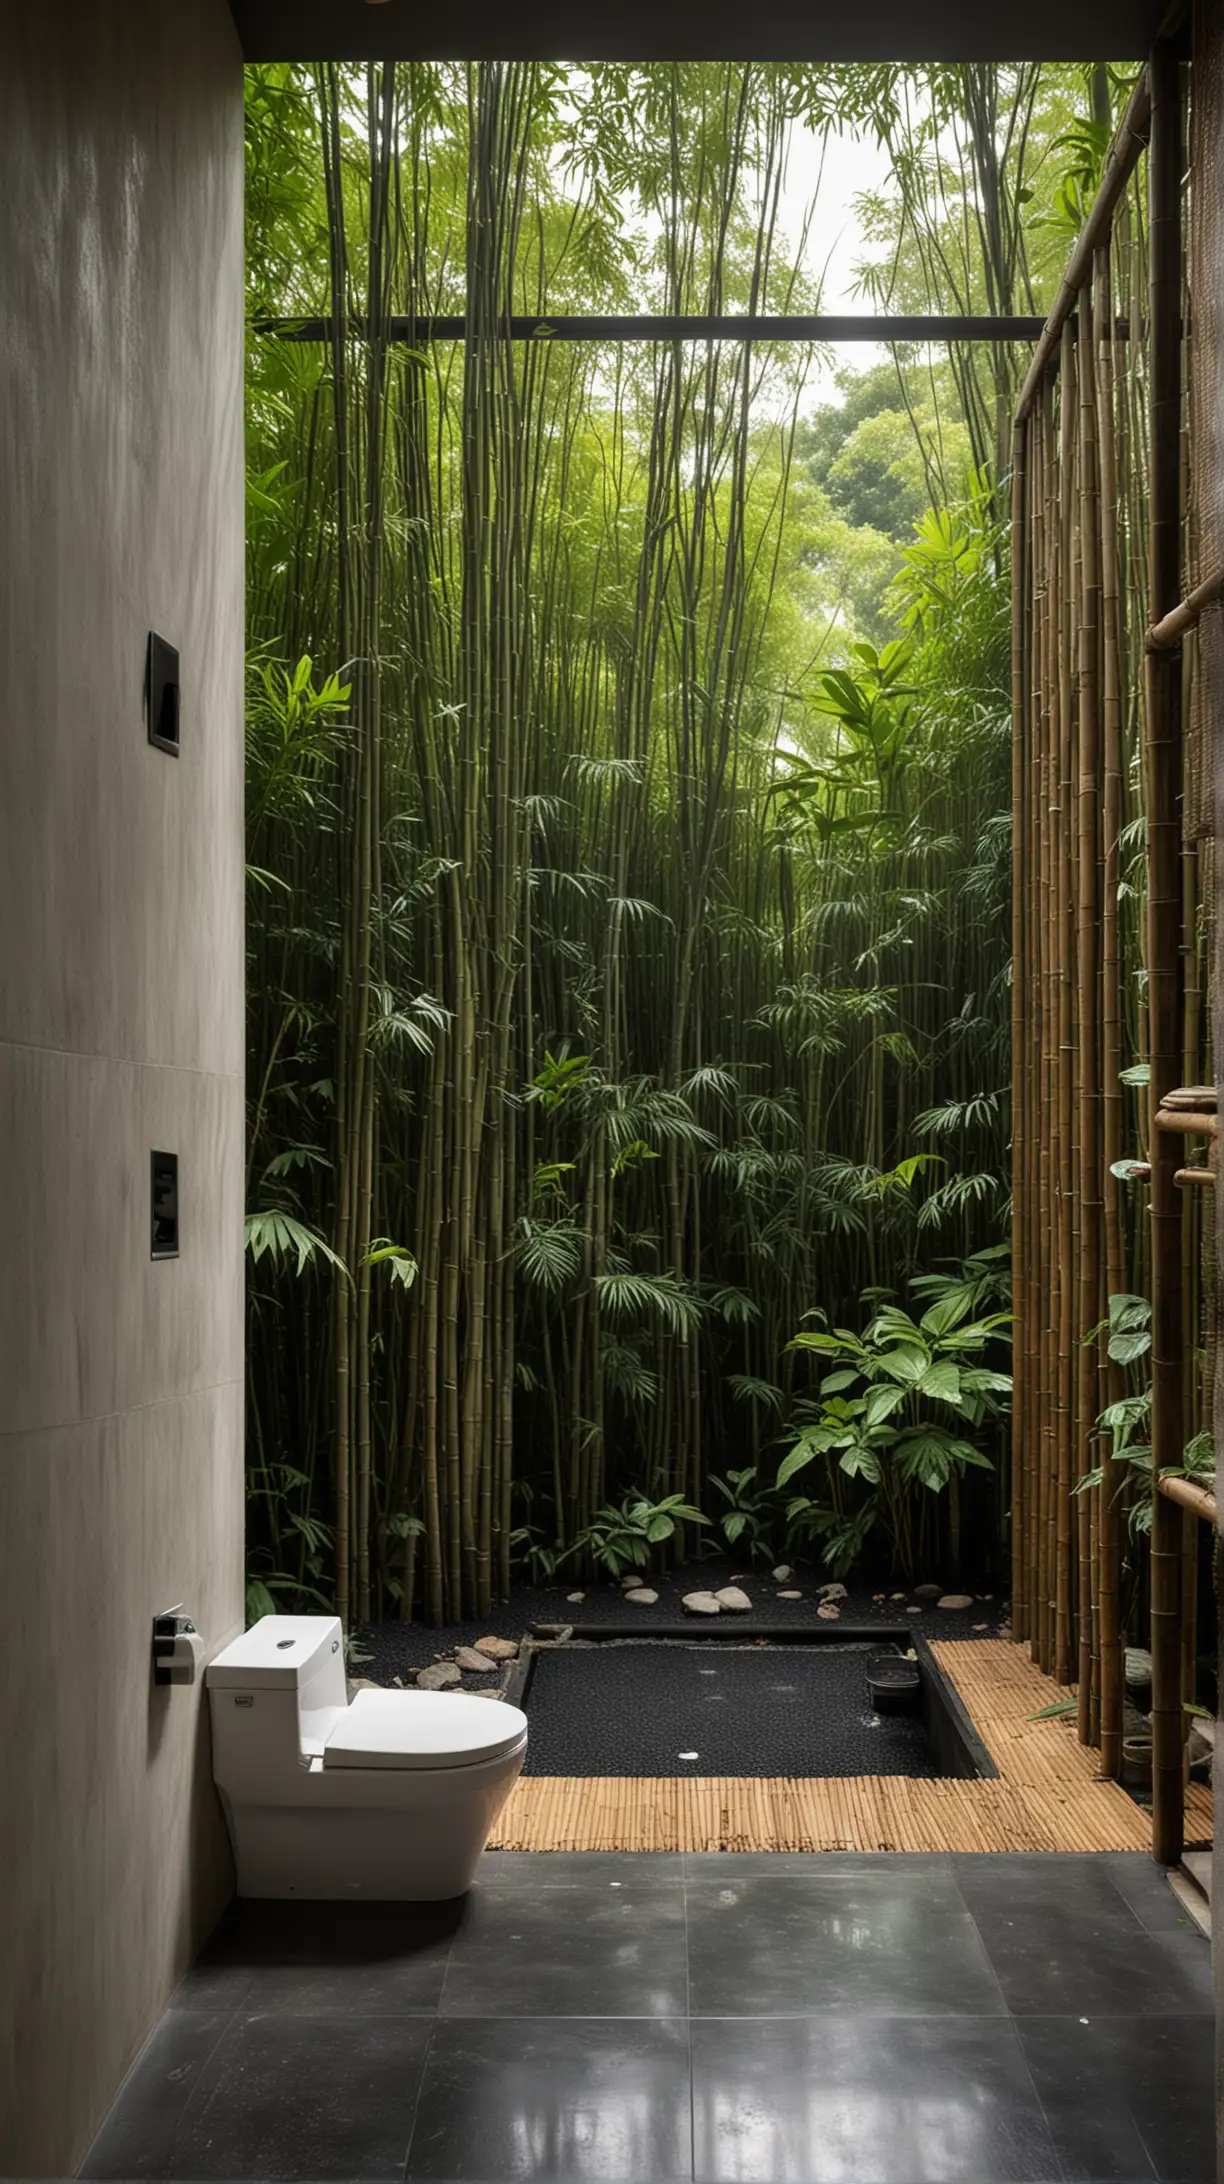 Flush toilet Surrounded by the nature of a tropical rainforest, bamboo screens, black gravel floors, open views of the sky, soft sunlight in the afternoon atmosphere.